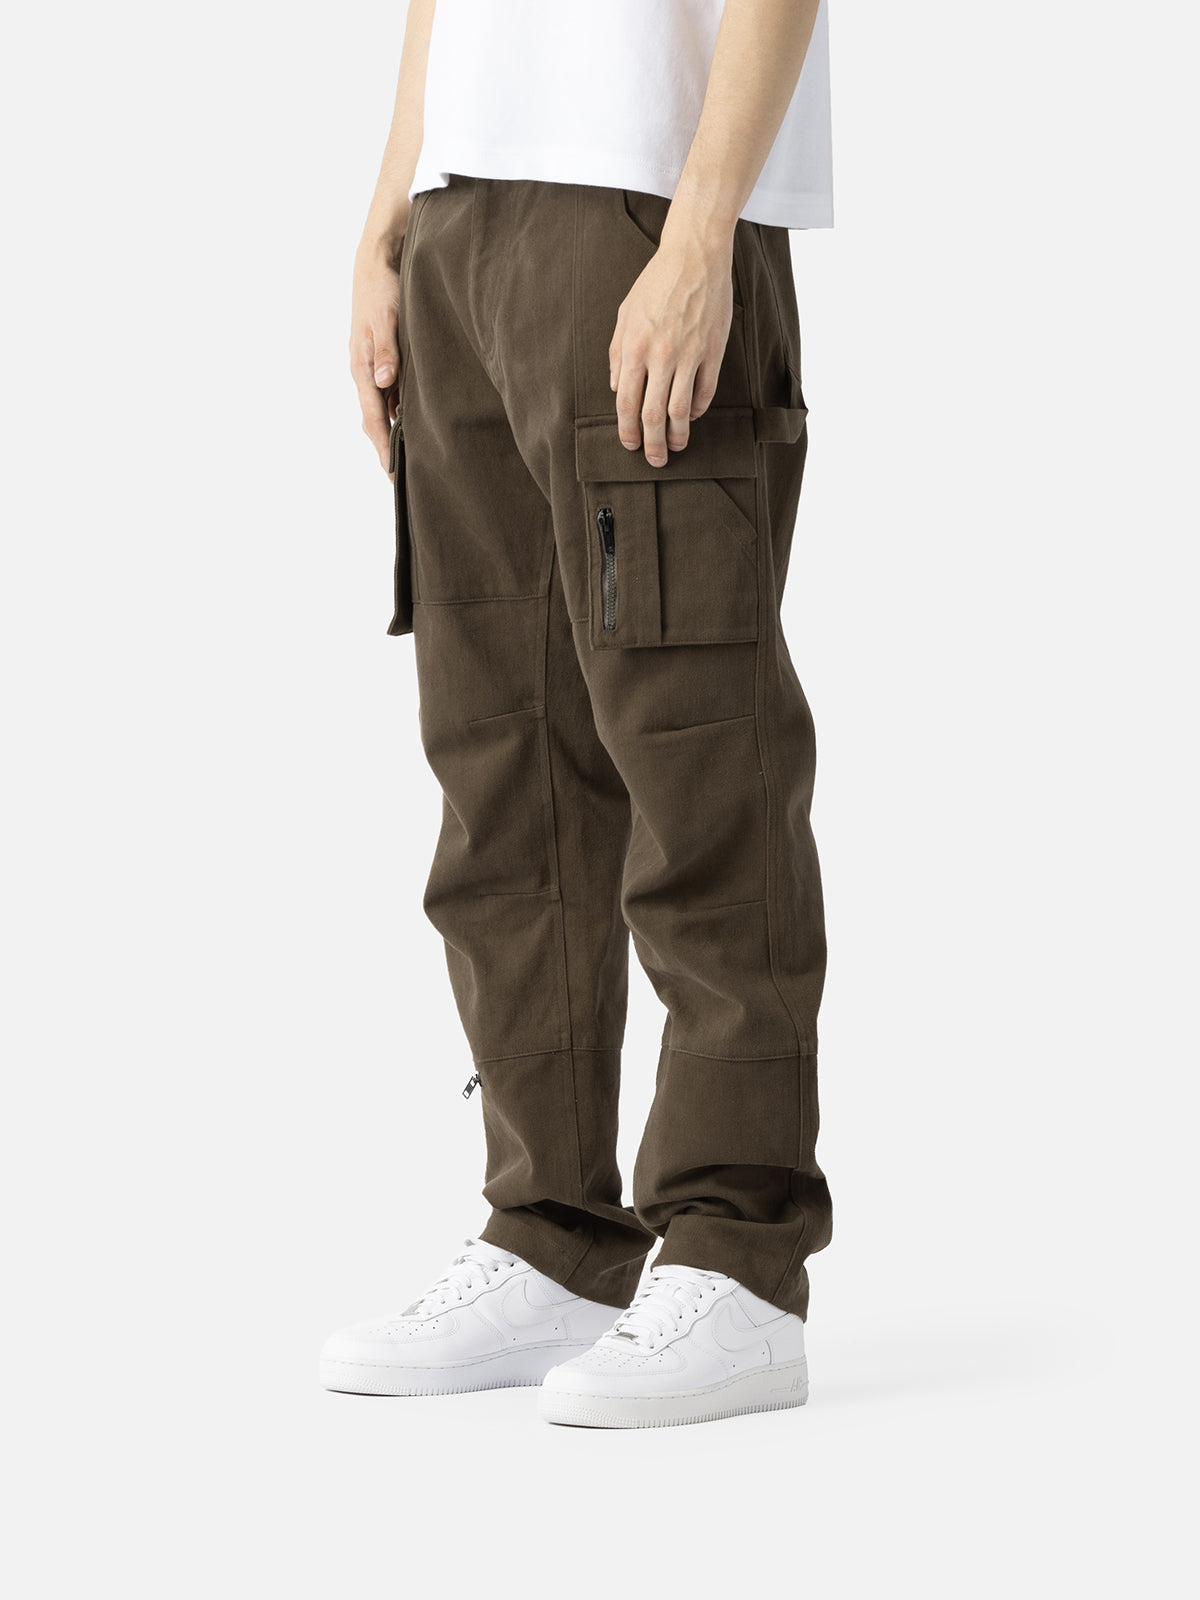 Carhartt WIP Cargo Pants for Fall 2019